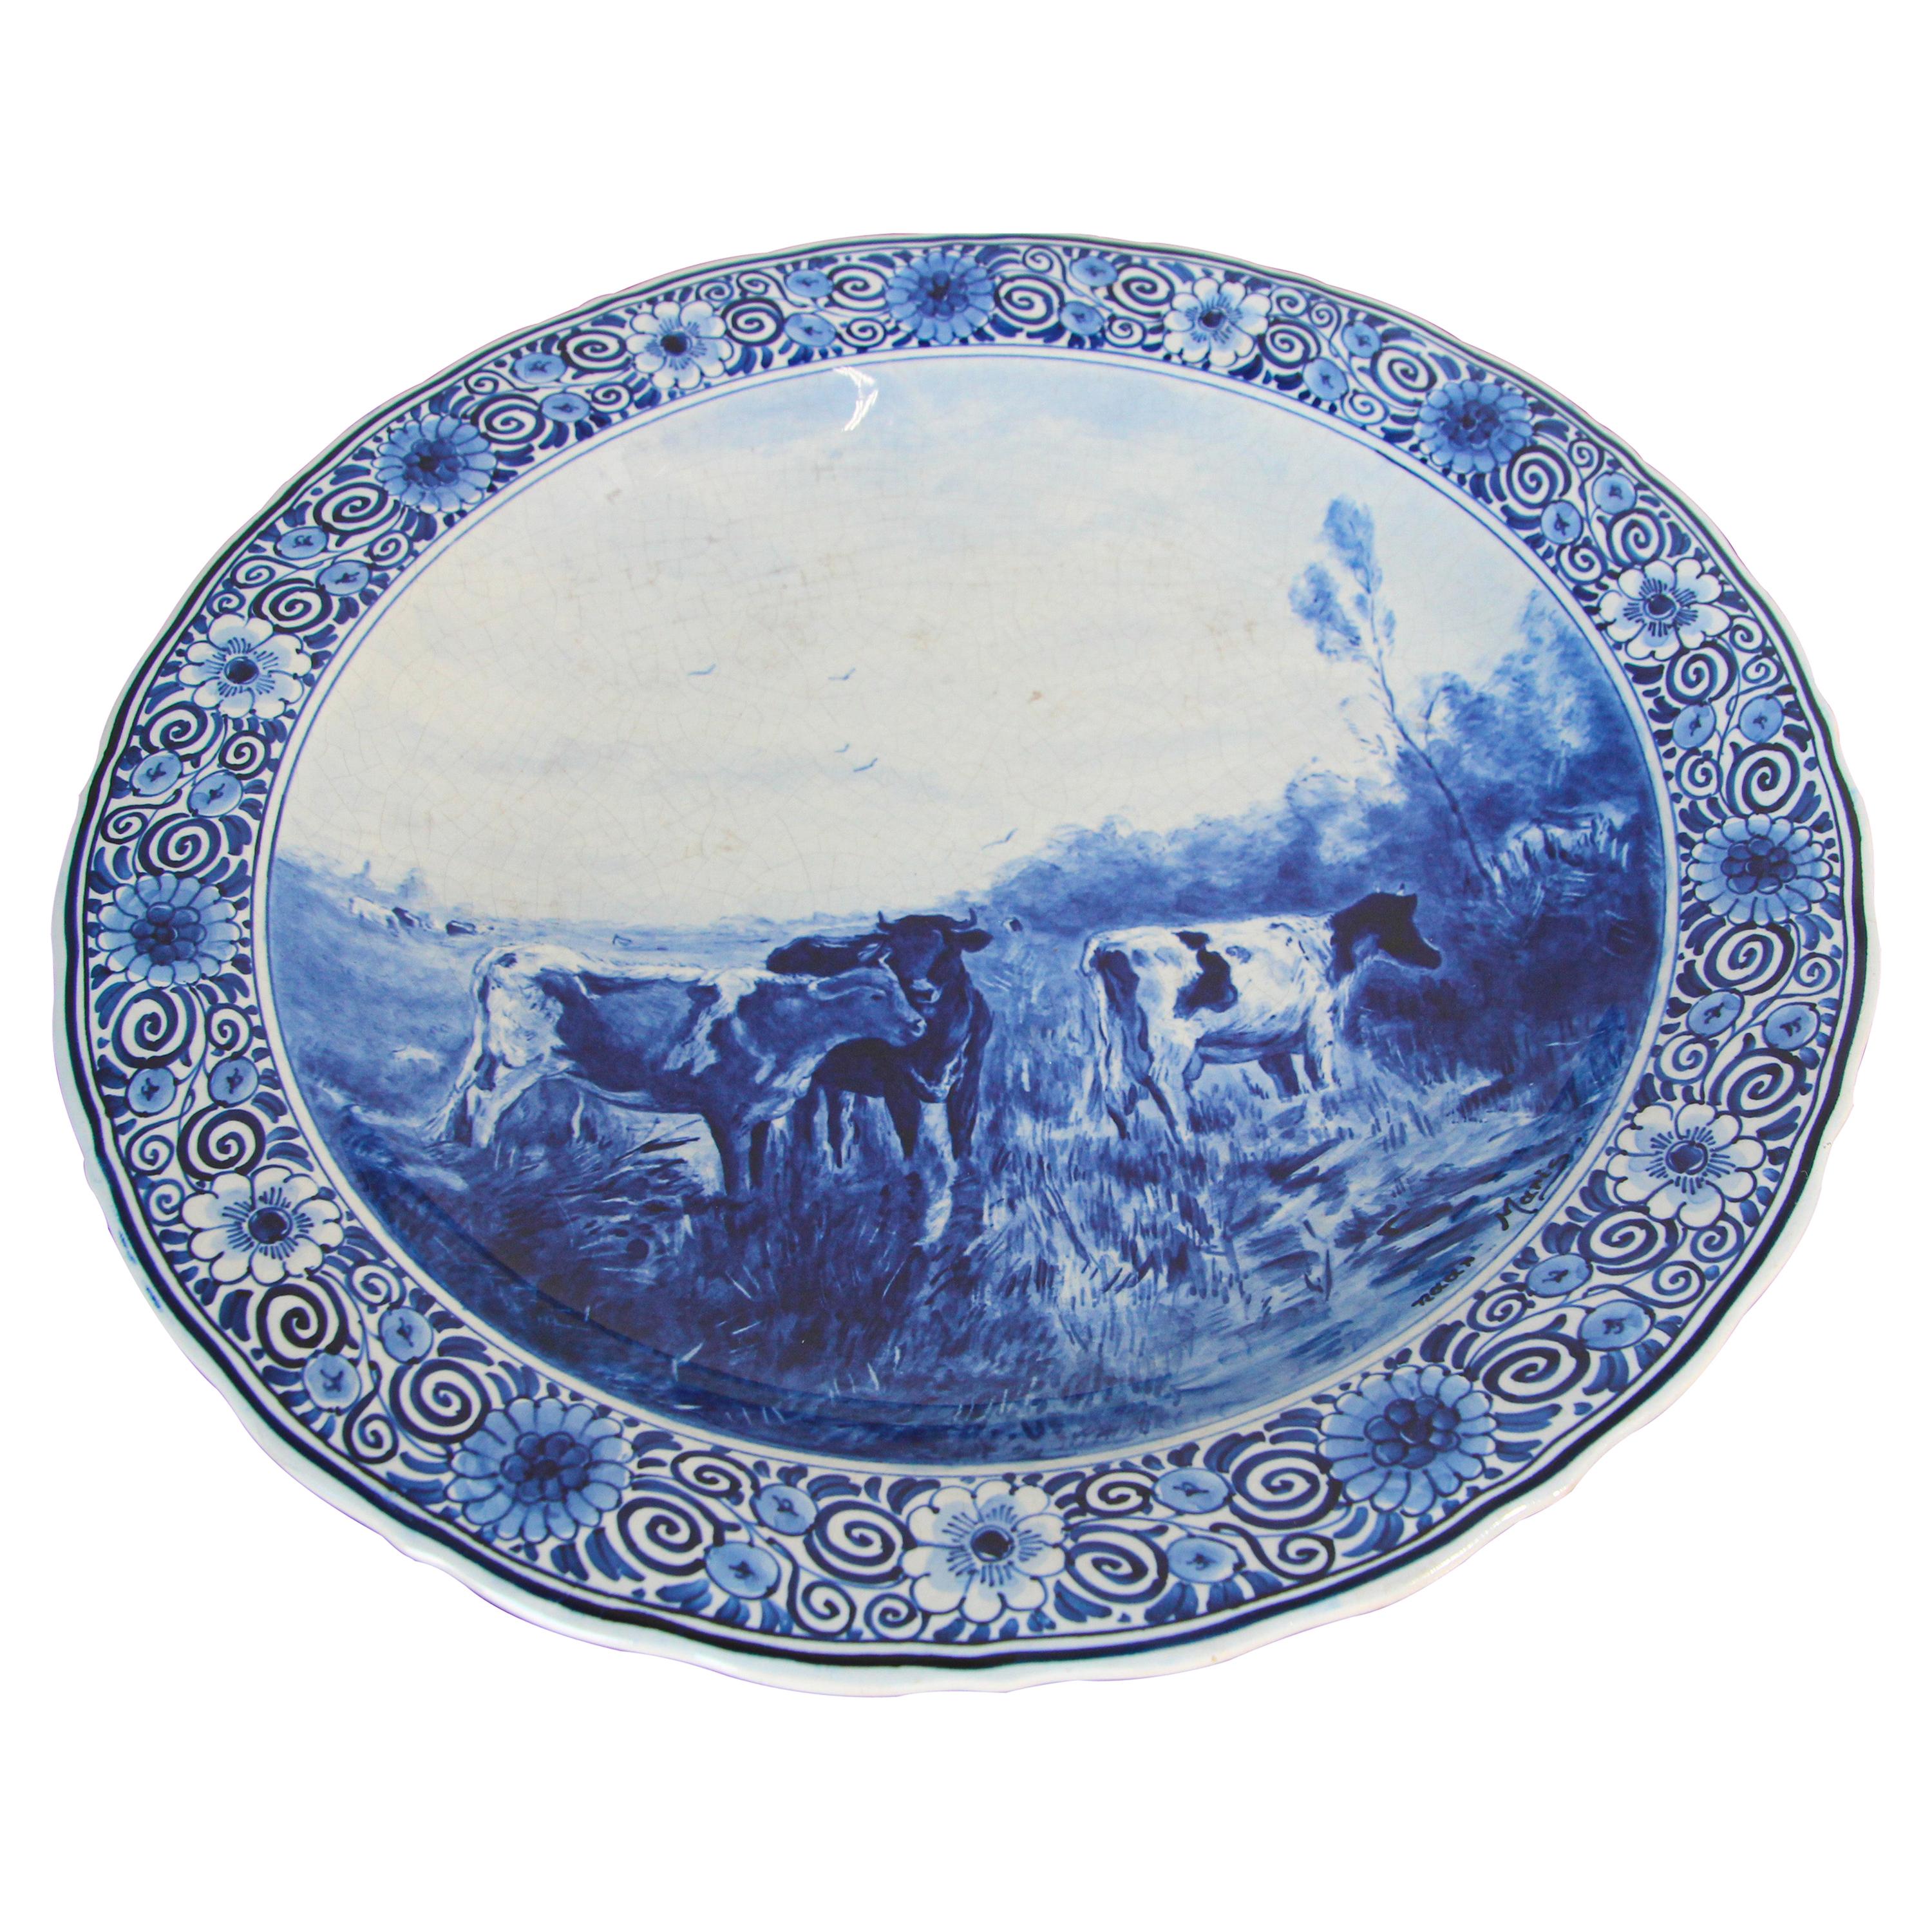 Large Ceramic Hanging Plate Blue and White Dutch Delft Charger